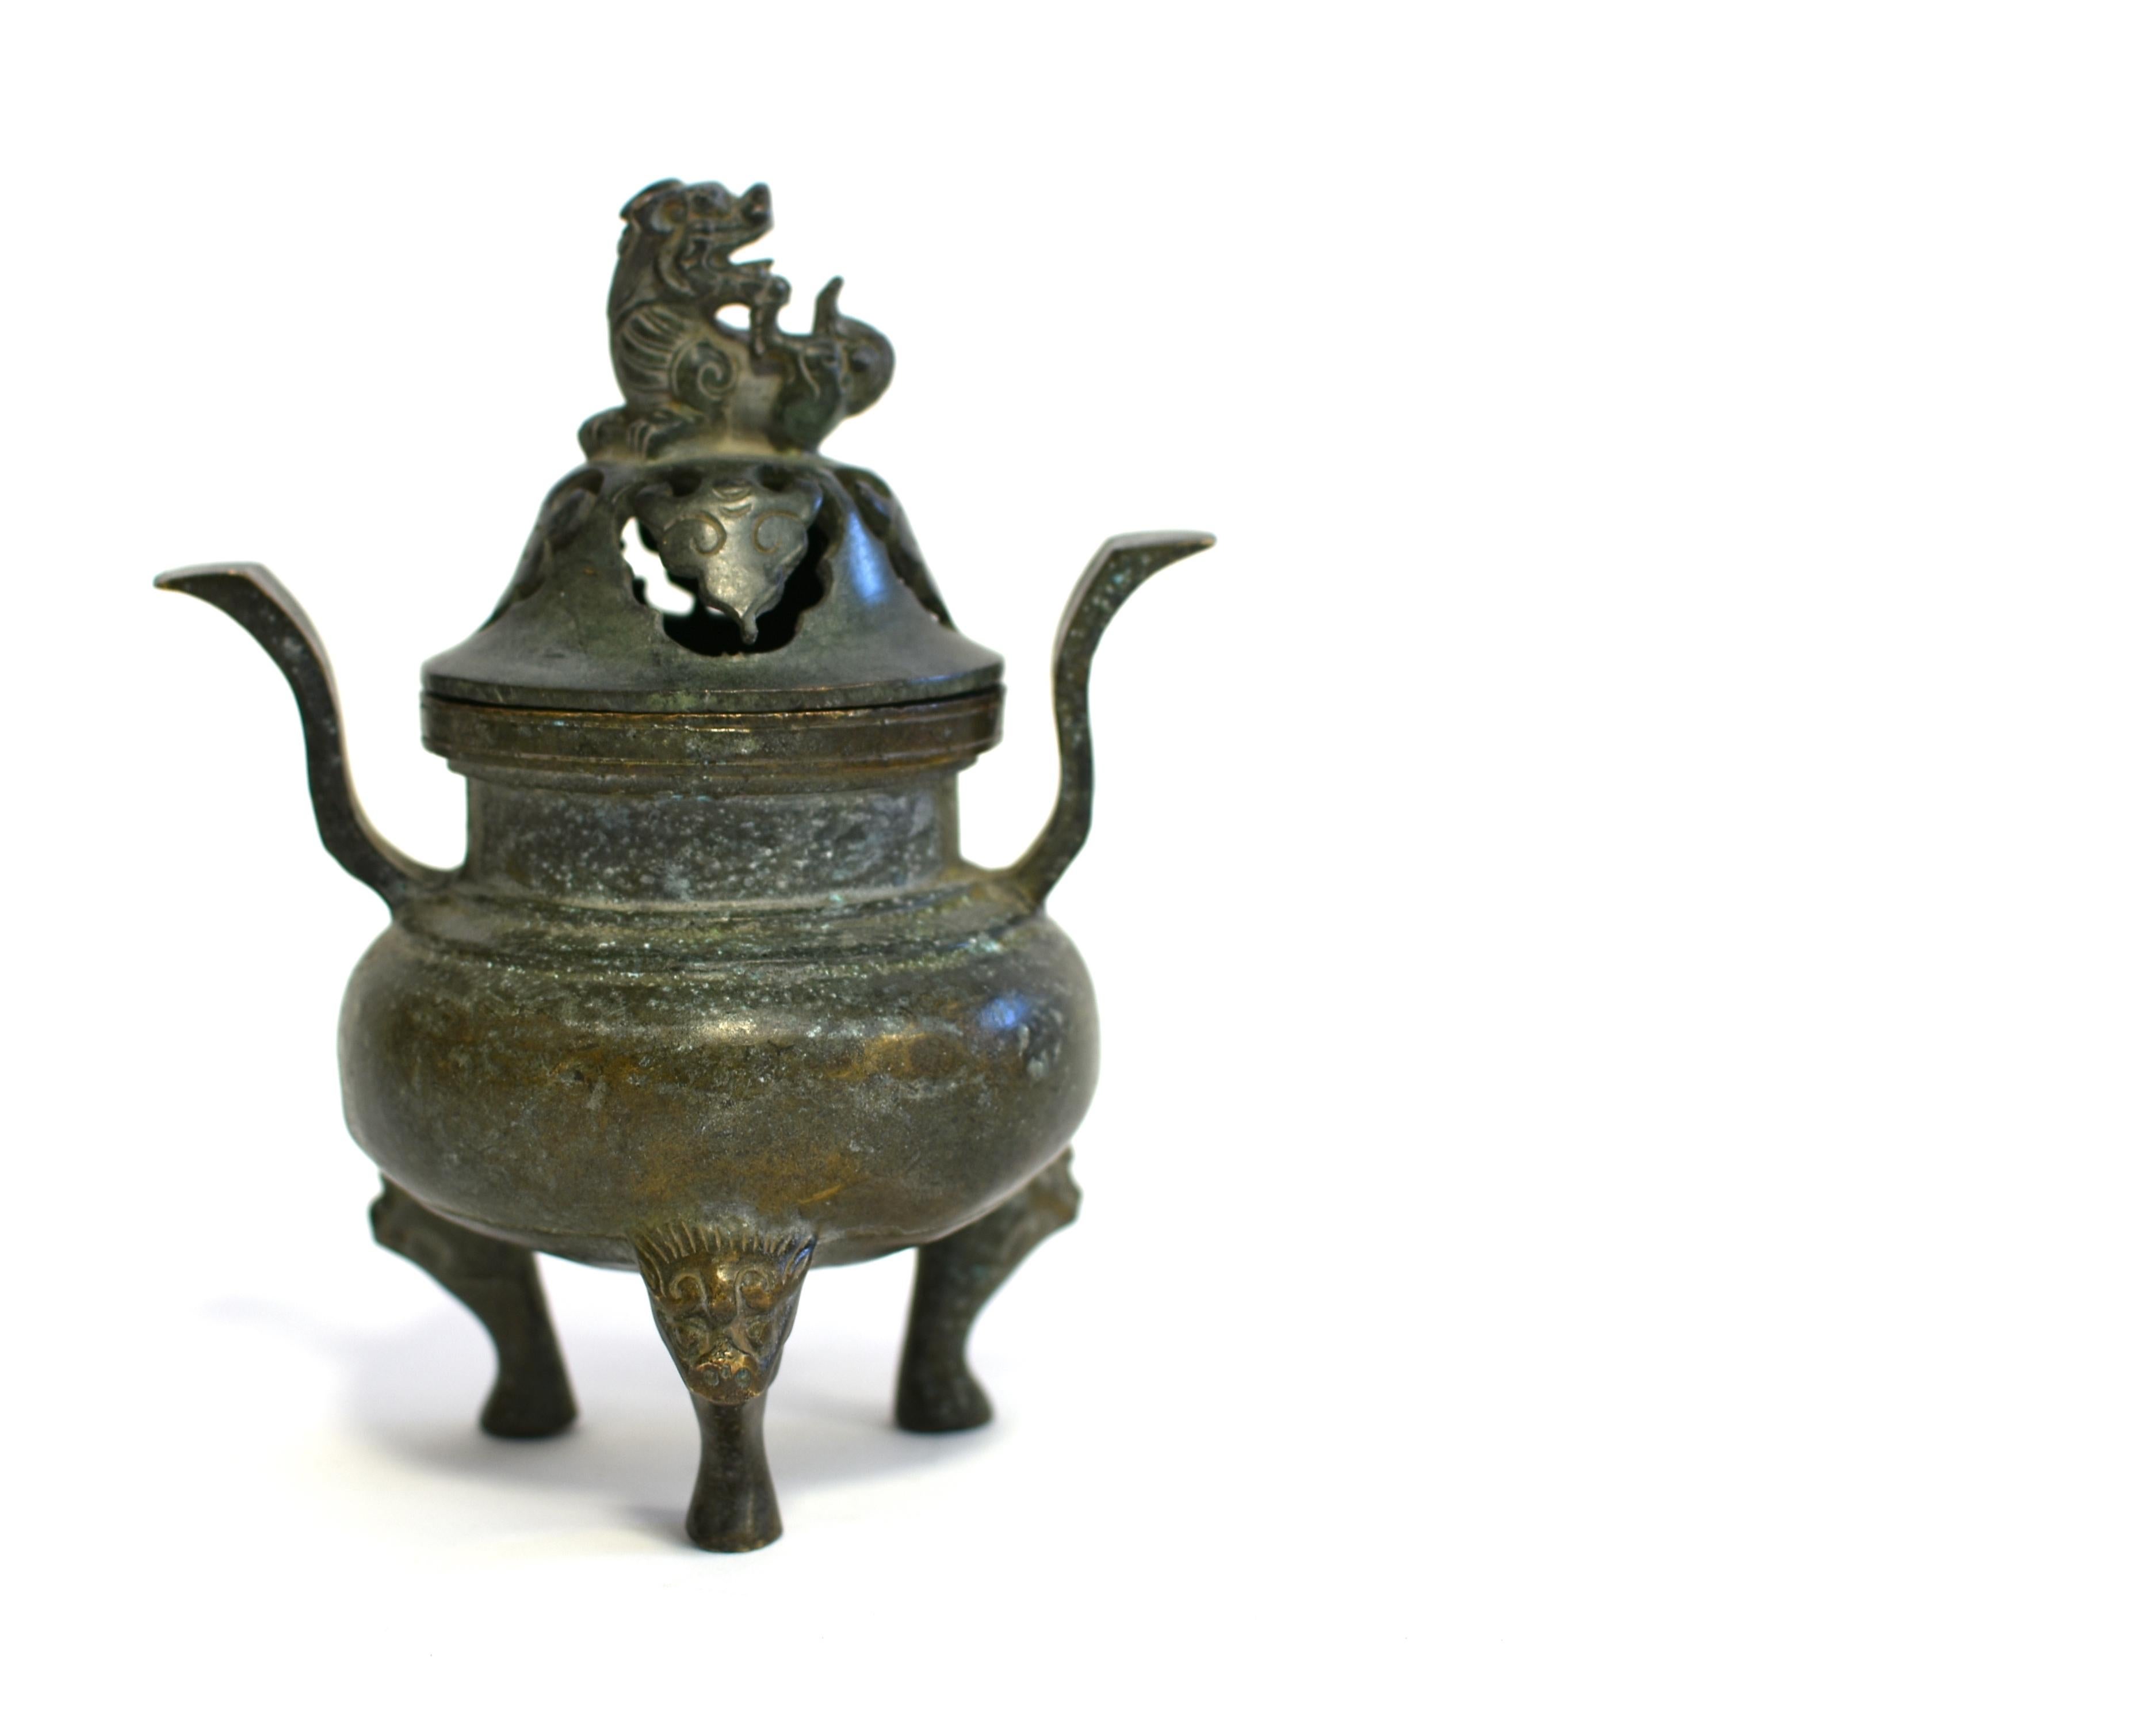 A beautiful antique bronze incense burner in the Ming dynasty style. The vessel's bulbous sides are free of decorations, below two curved upright handles and supported on three animal-form feet issuing from lion masks. The cover is pierced with a